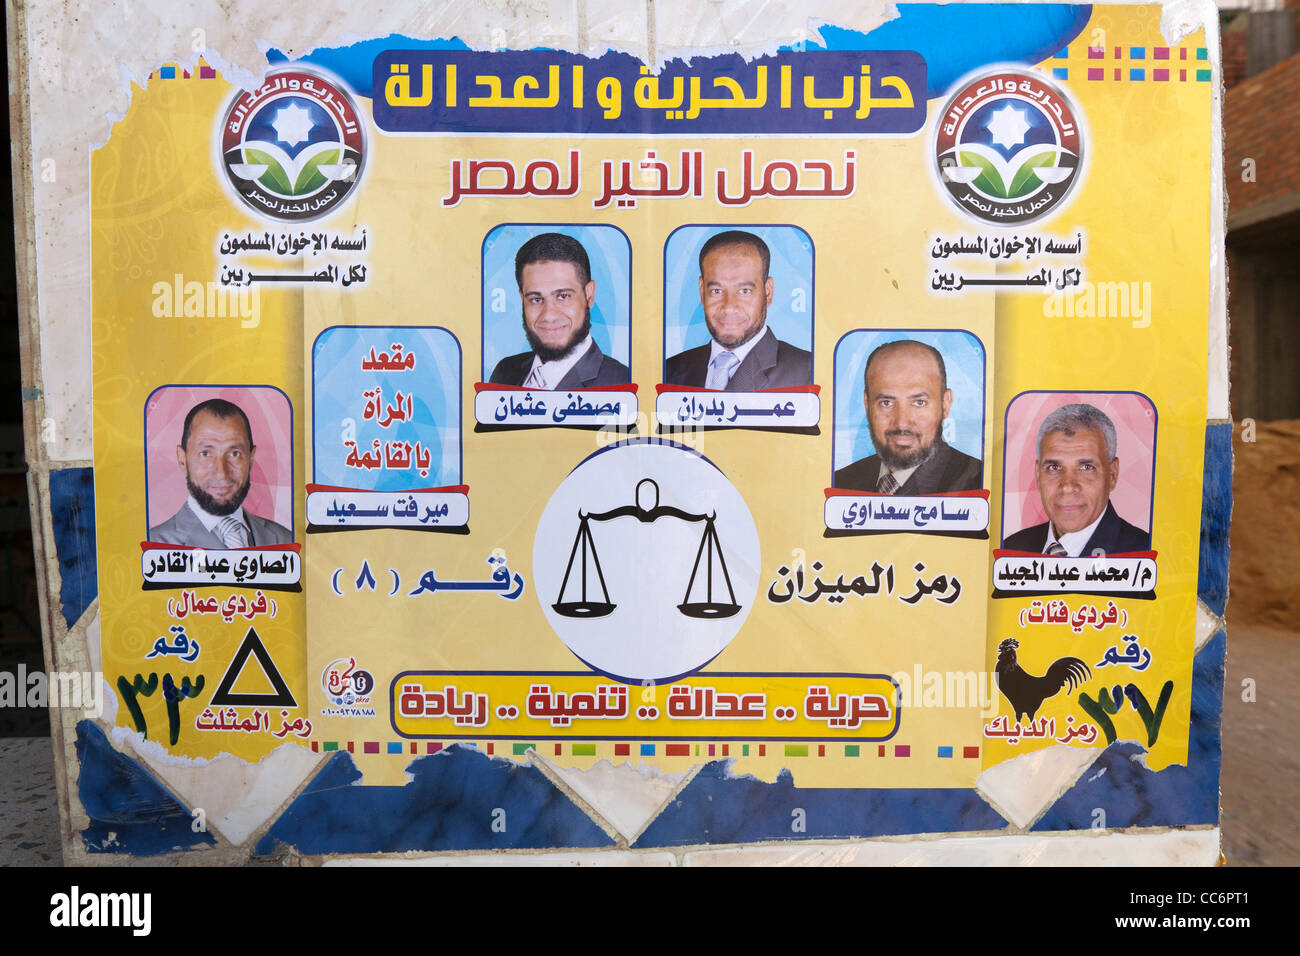 Political posters and slogans to be found in Egypt during the election campaigns. Stock Photo